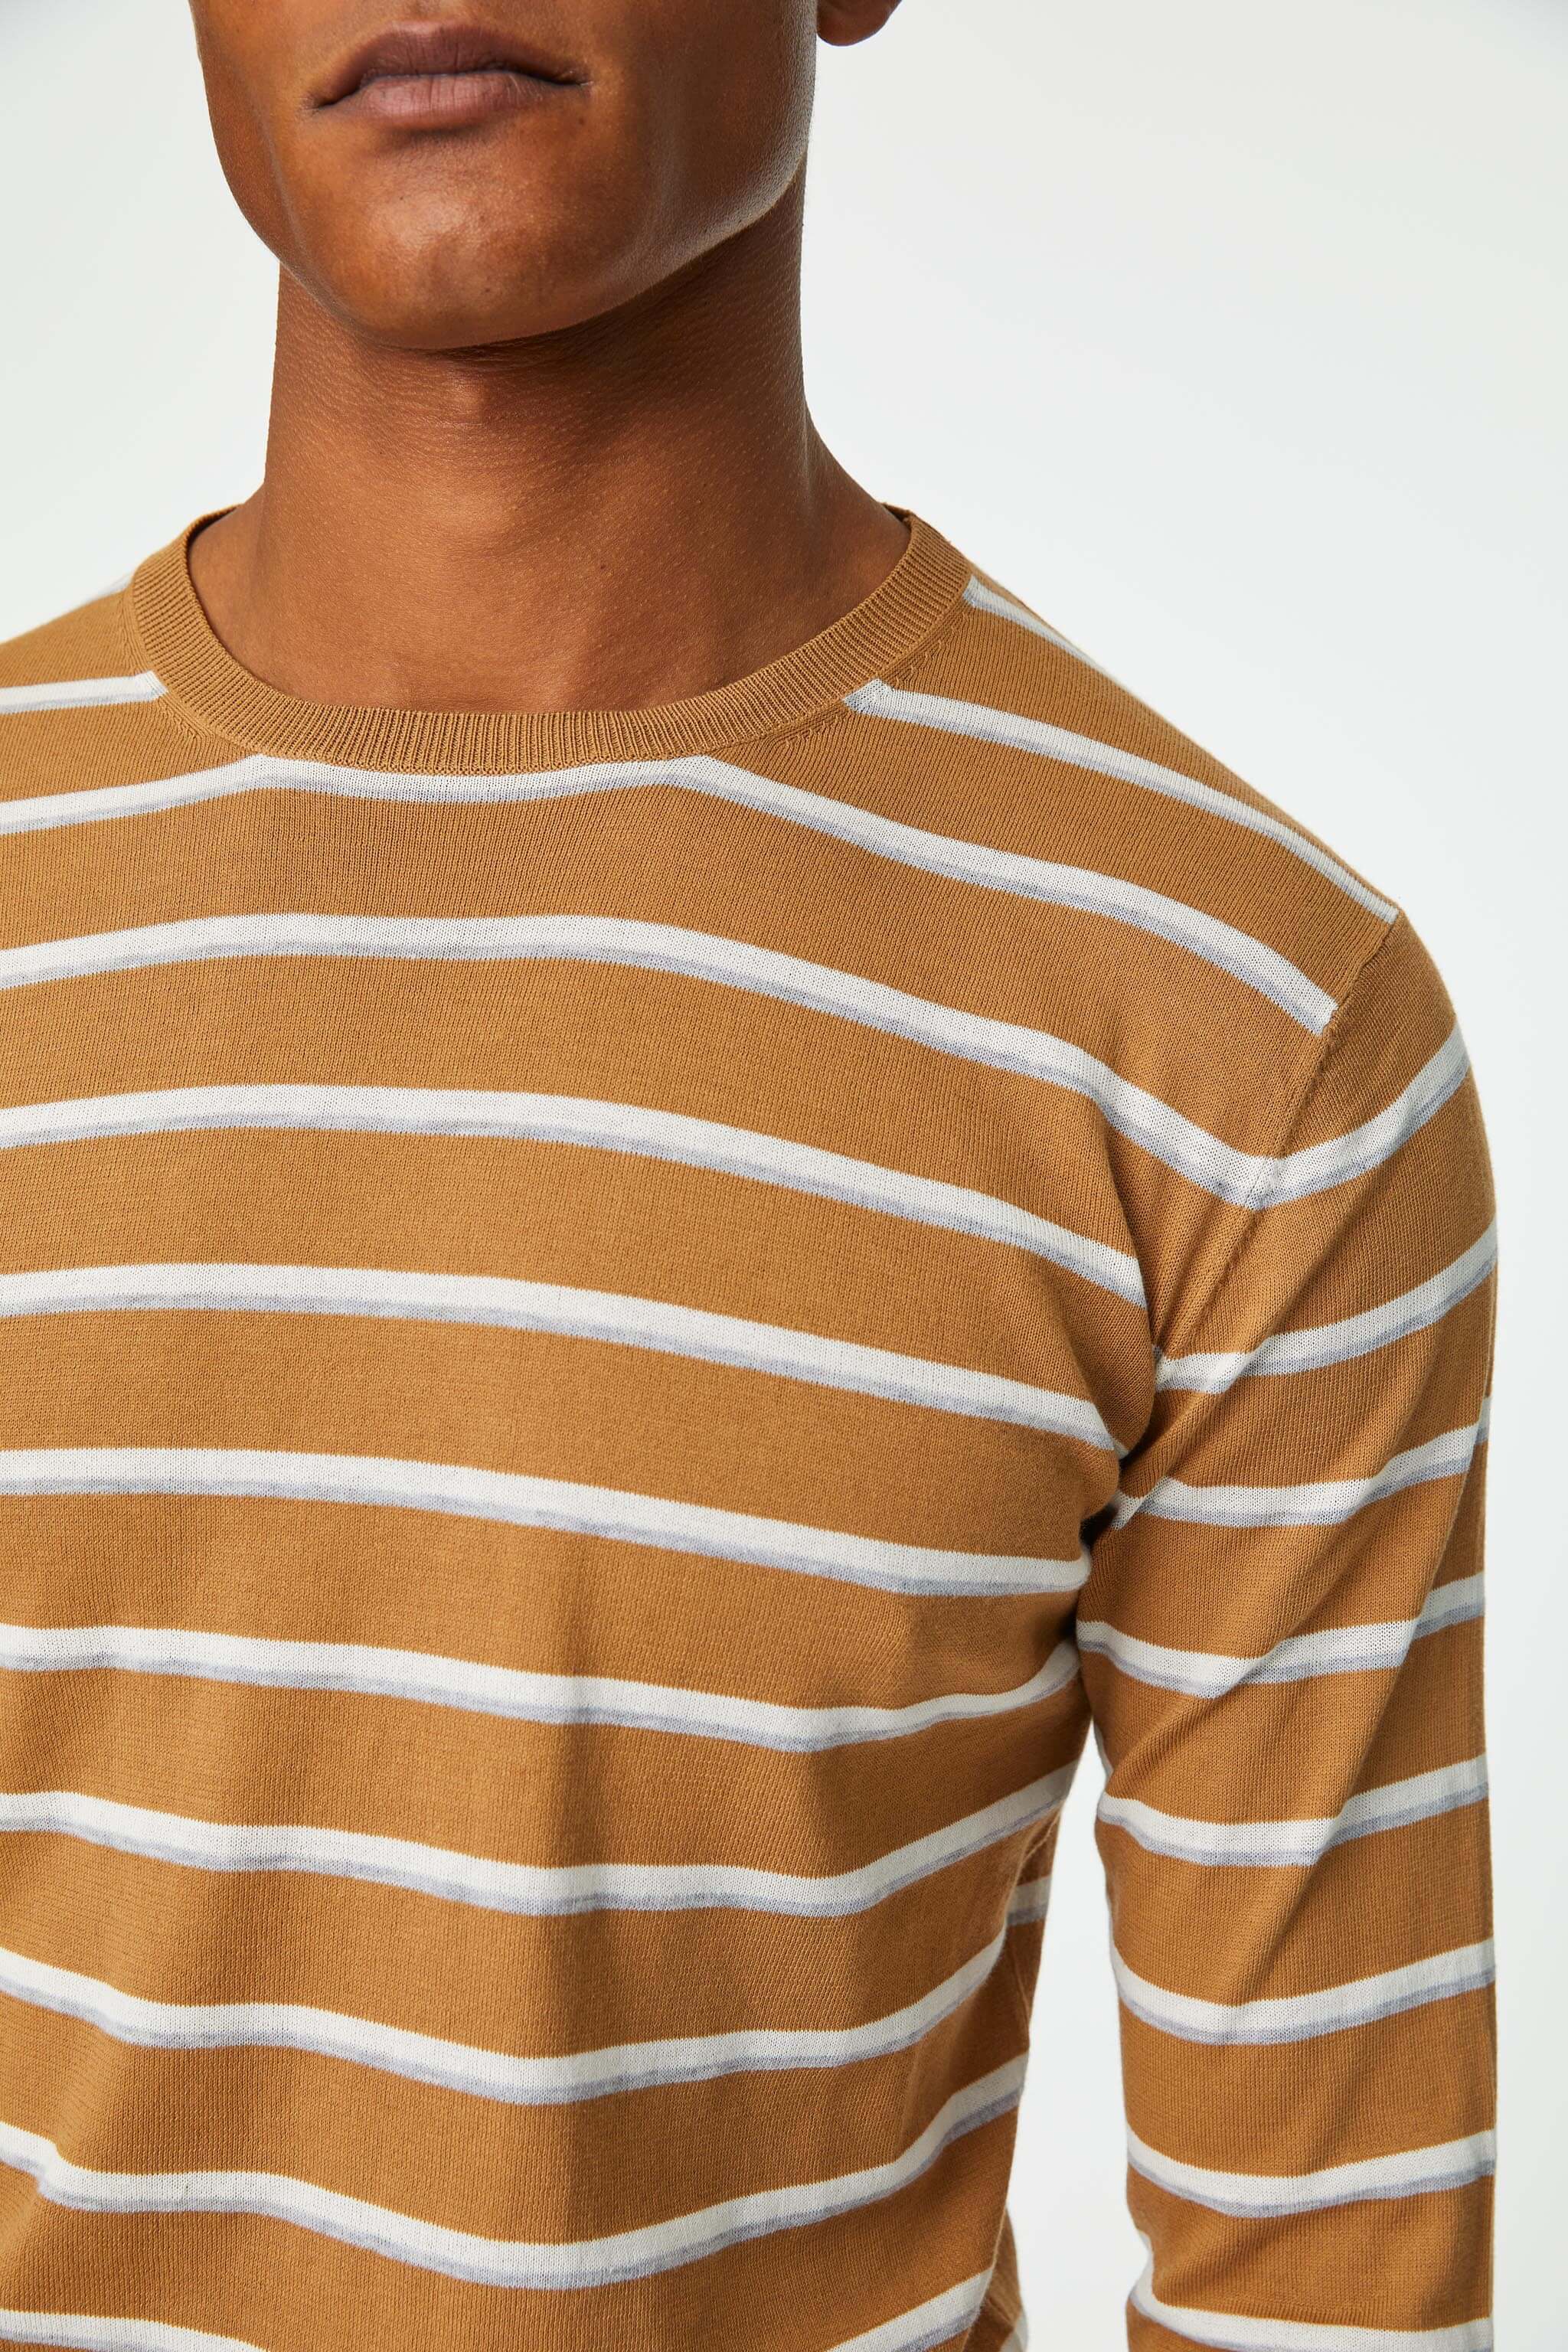 Long-sleeve camel shirt in striped cotton